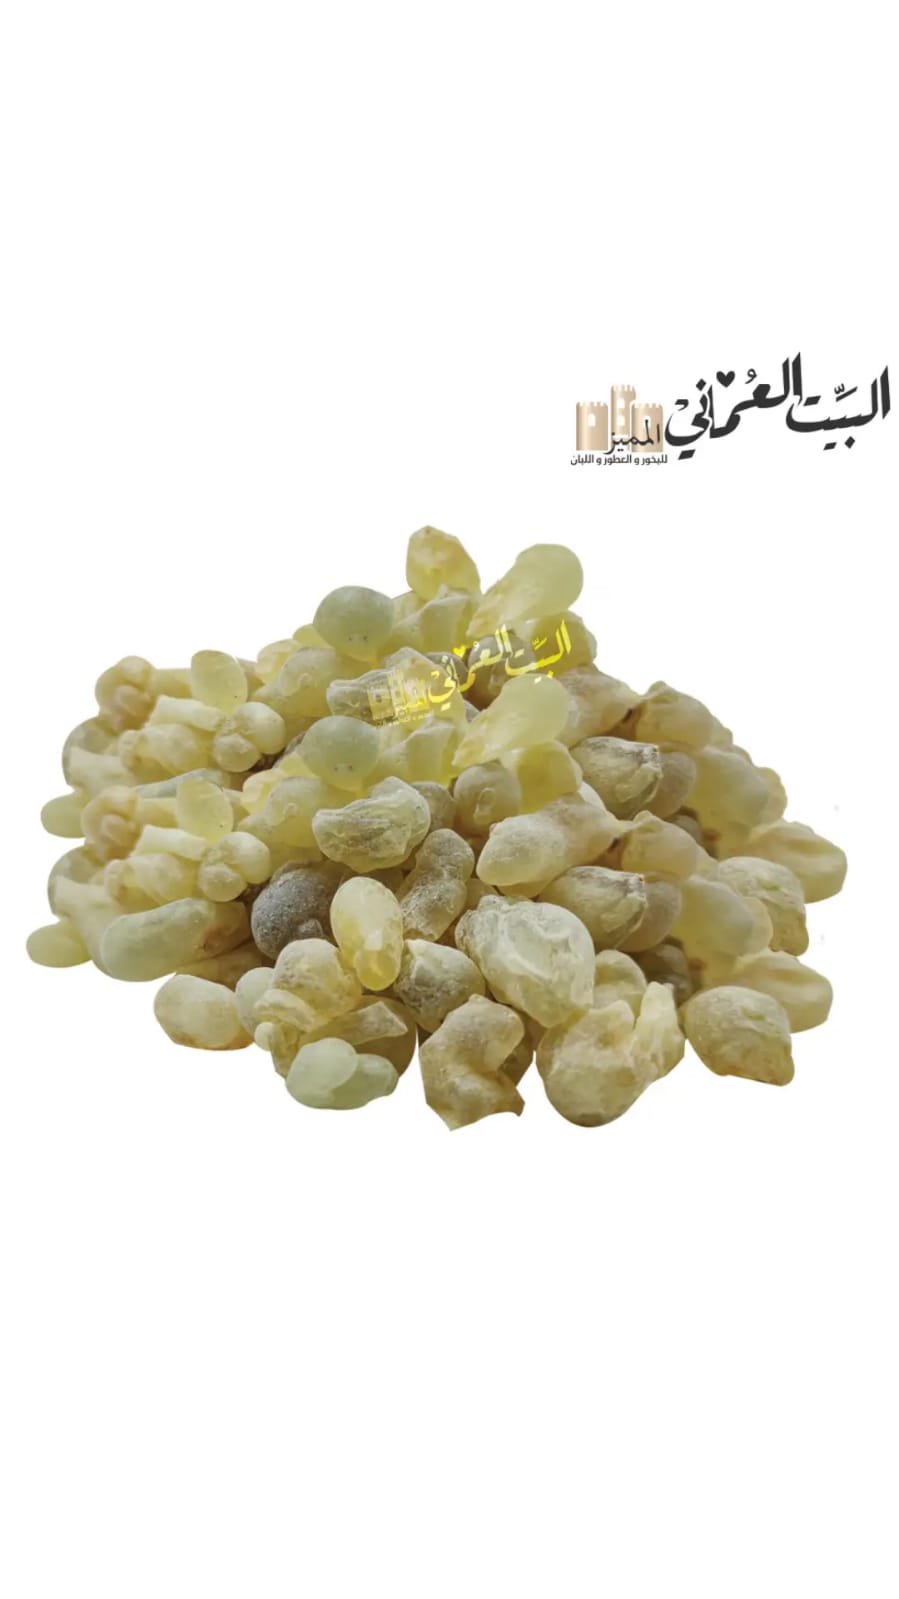 Frankincense is a green male for treatment